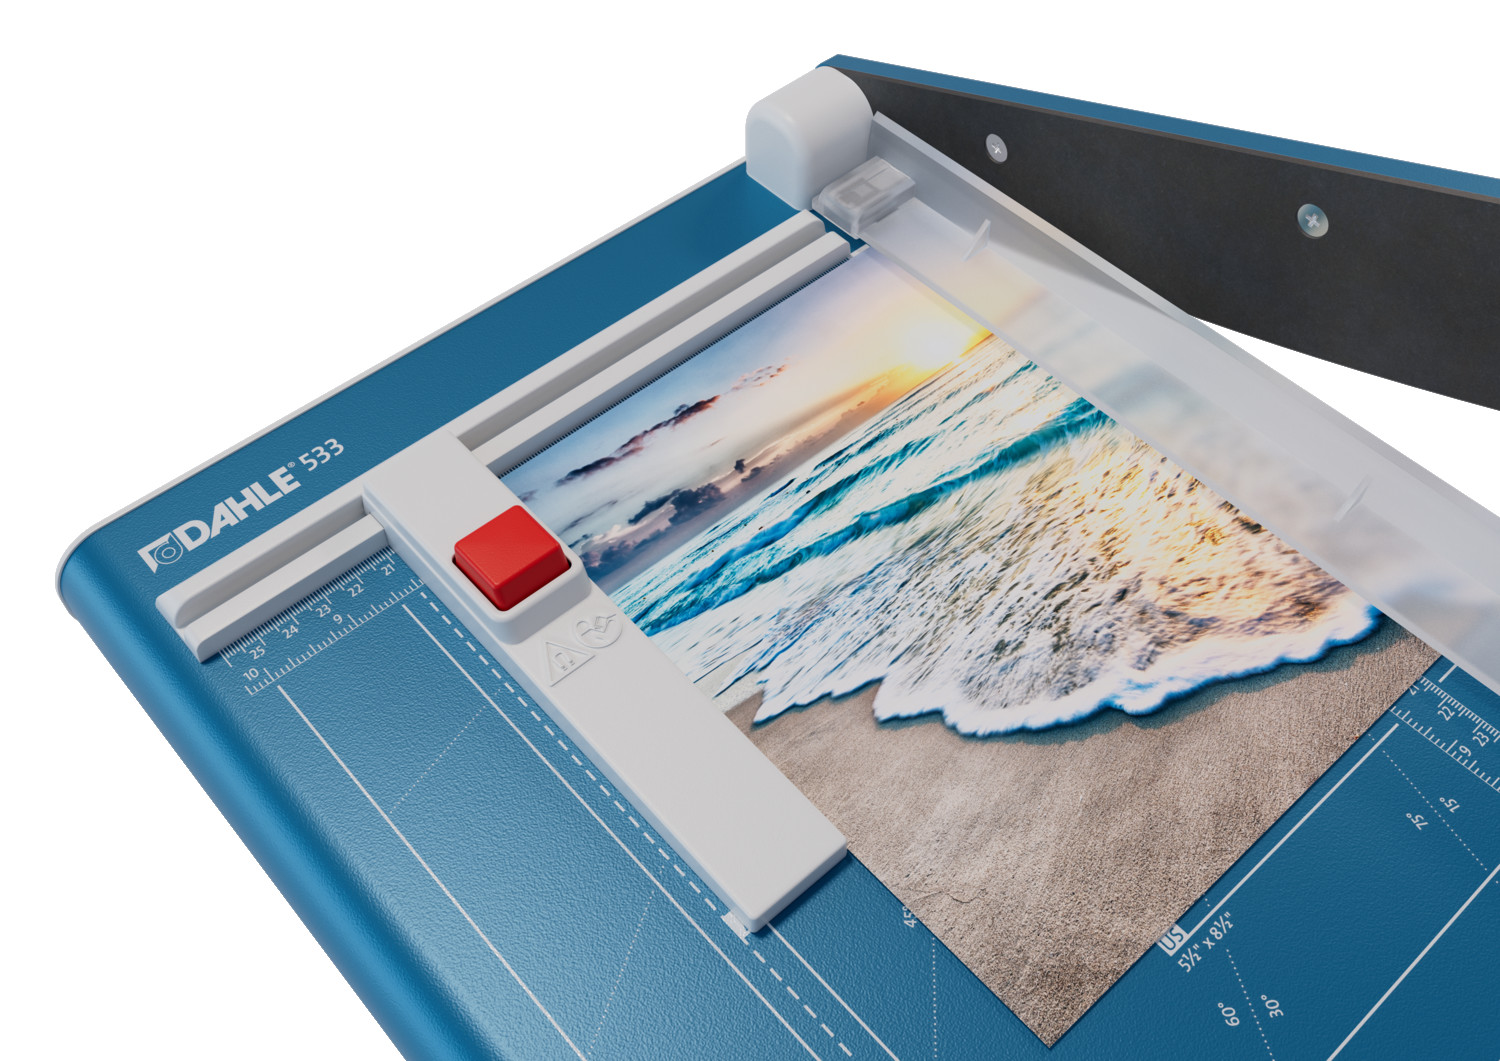 The DAHLE 533 guillotine can cut up to 15 sheets at once